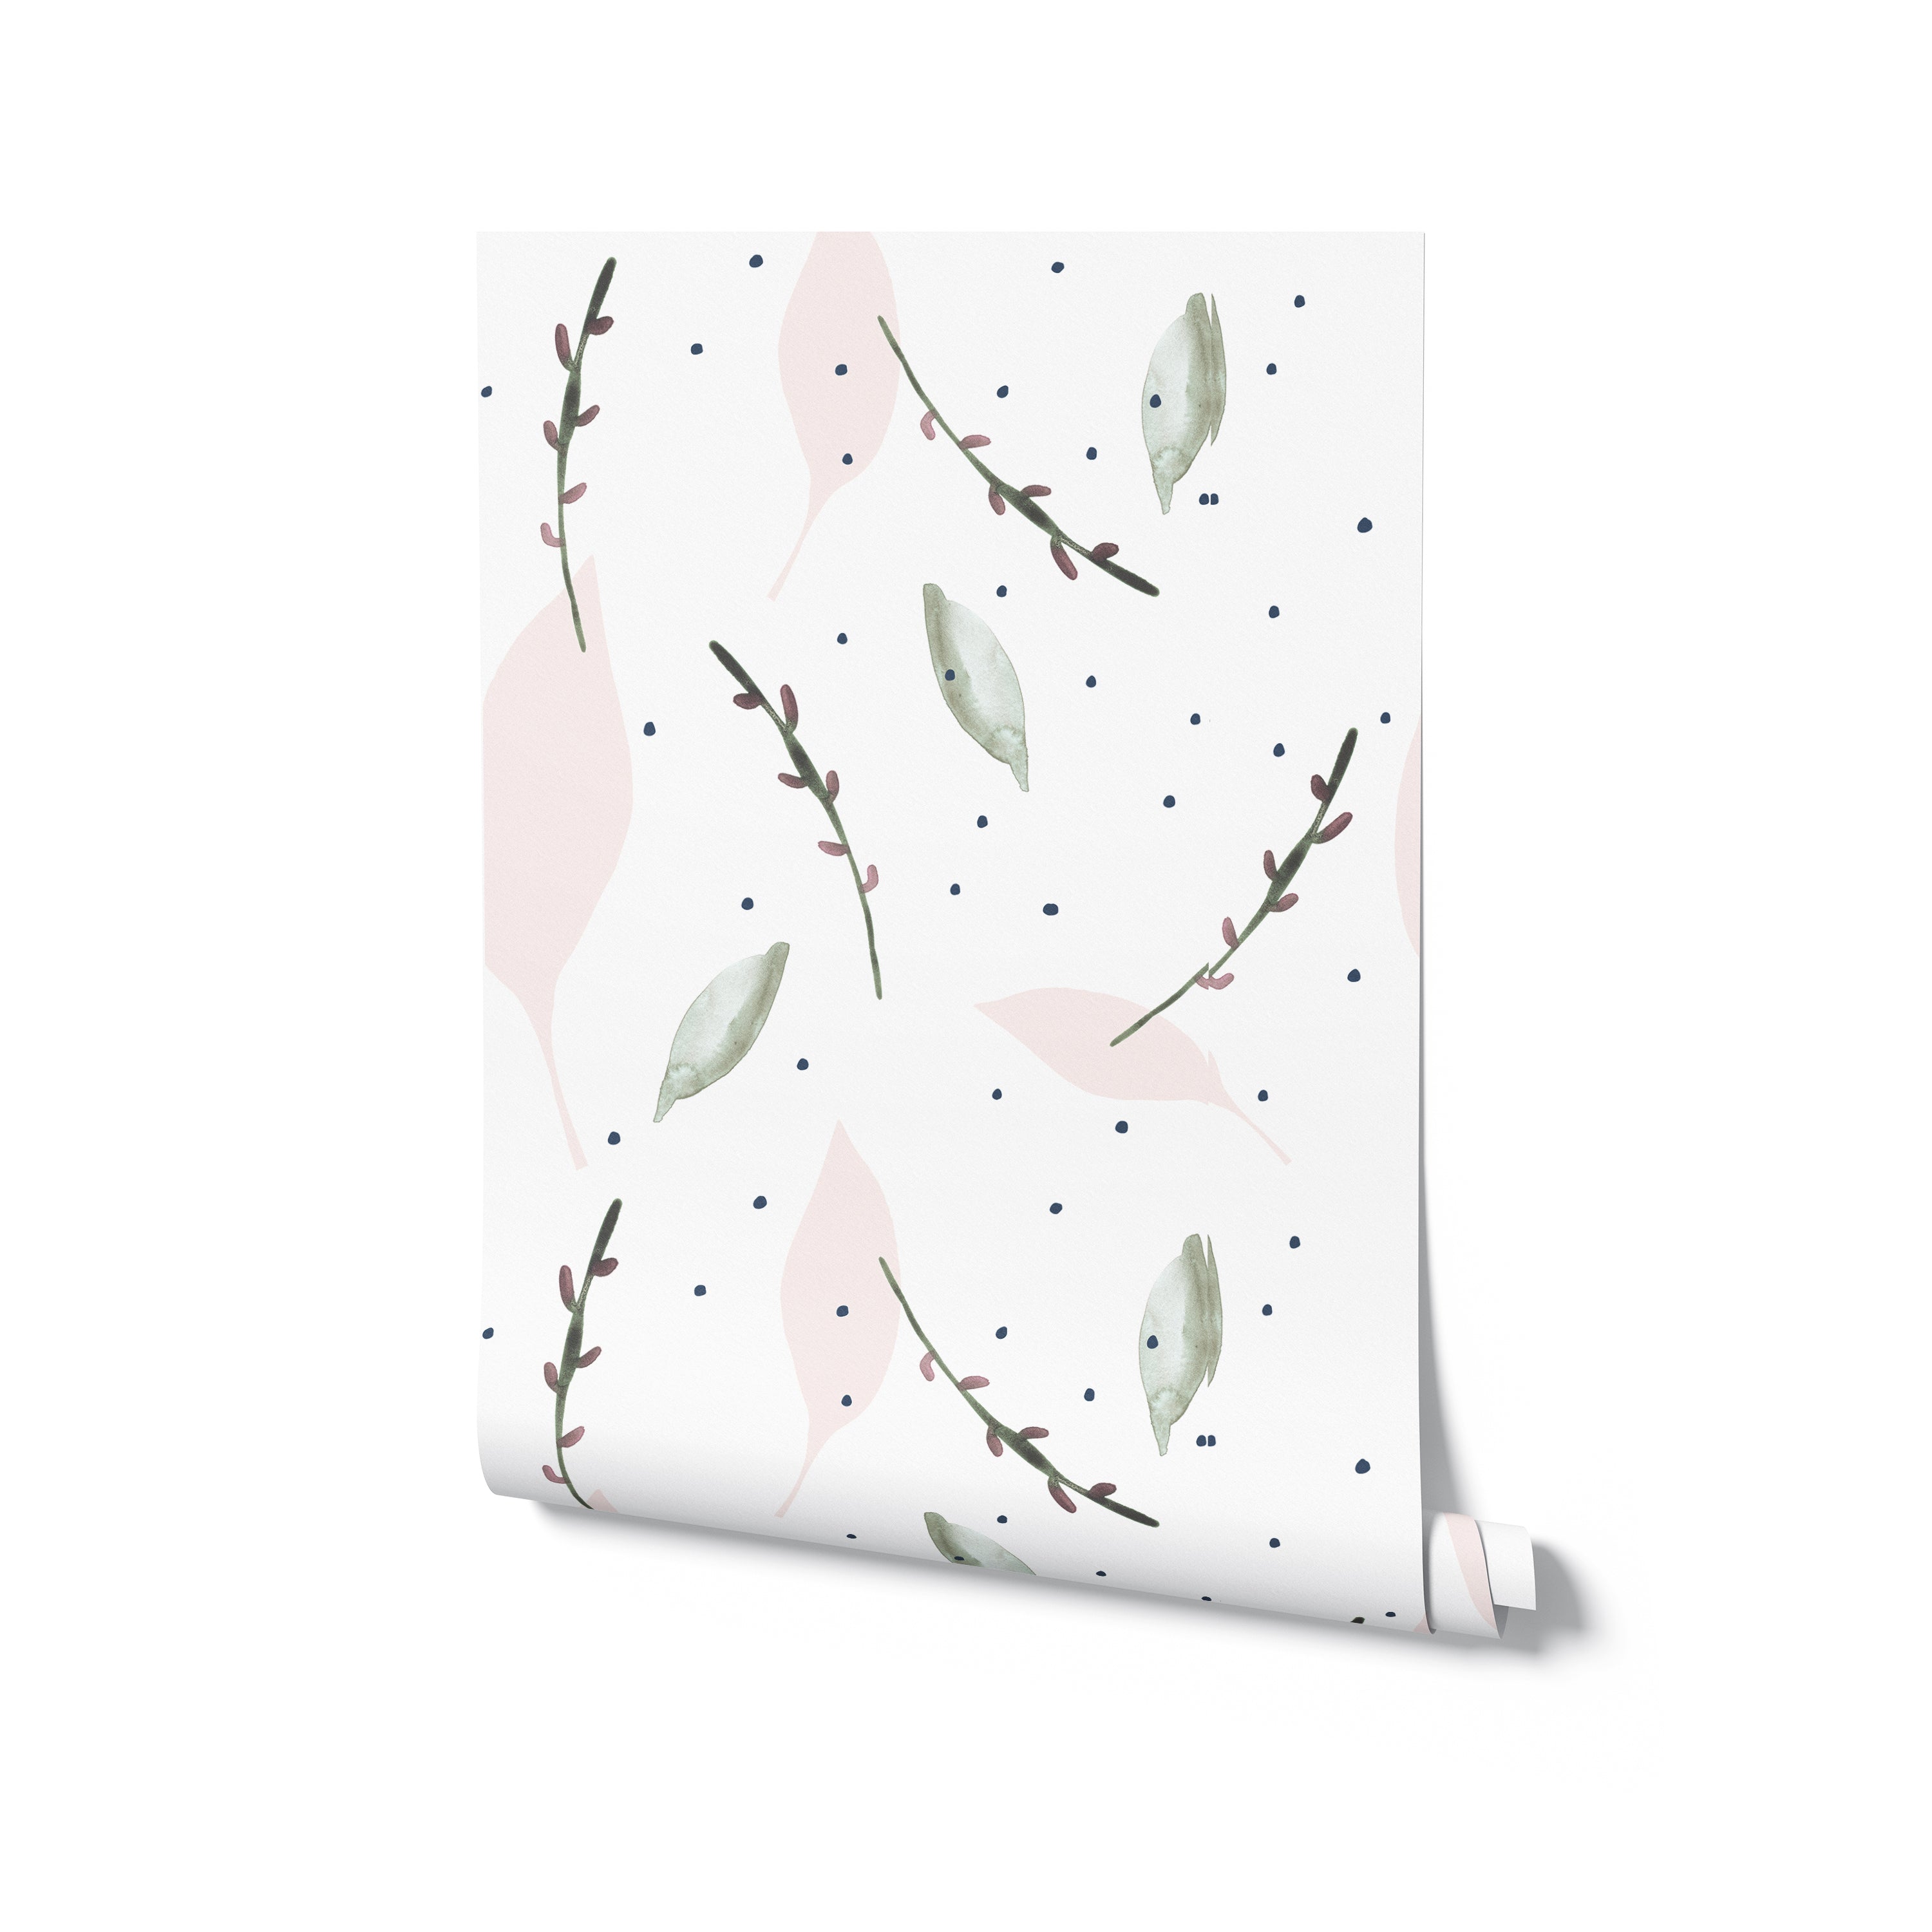 A rolled sample of 'Modern Abstract Leaf' wallpaper, presenting an artistic arrangement of abstract pink leaves, realistic green leaves, and navy dots on a pure white base, hinting at a modern and fresh approach to interior decor.